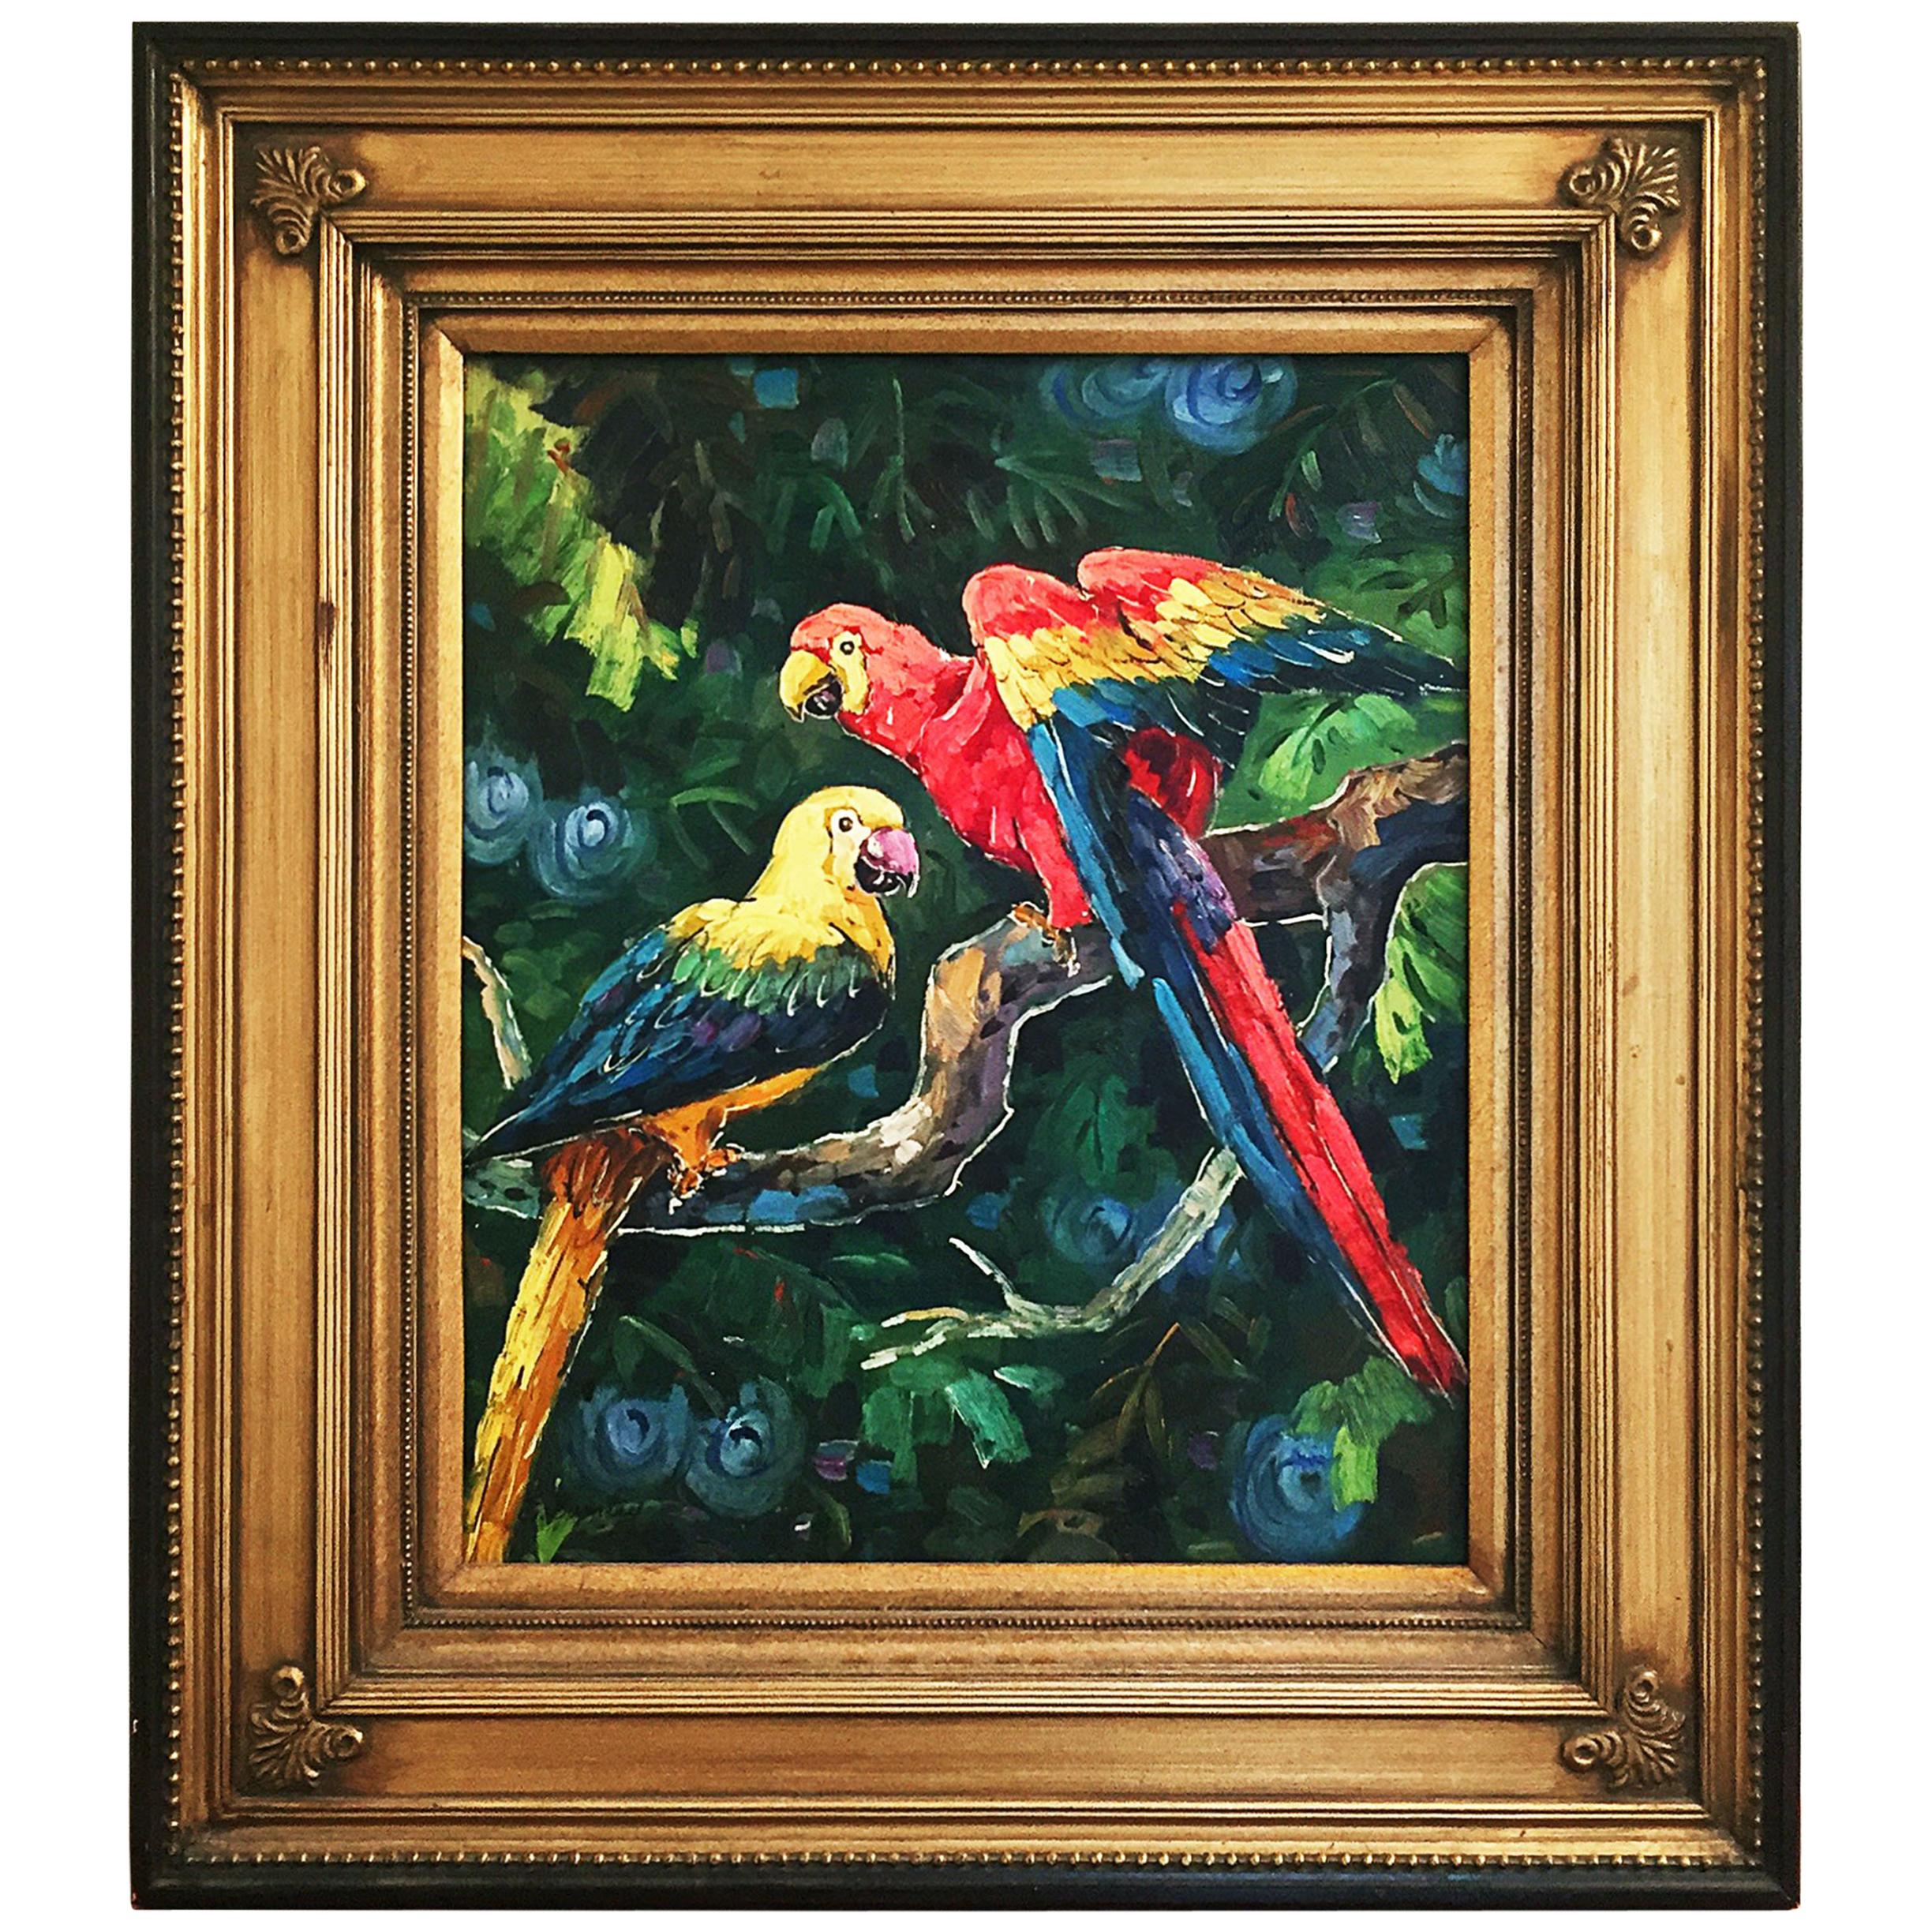 Exotic Jungle Pair of Parrots Painting on Gilded Large Frame, Oil on Canvas Boho For Sale